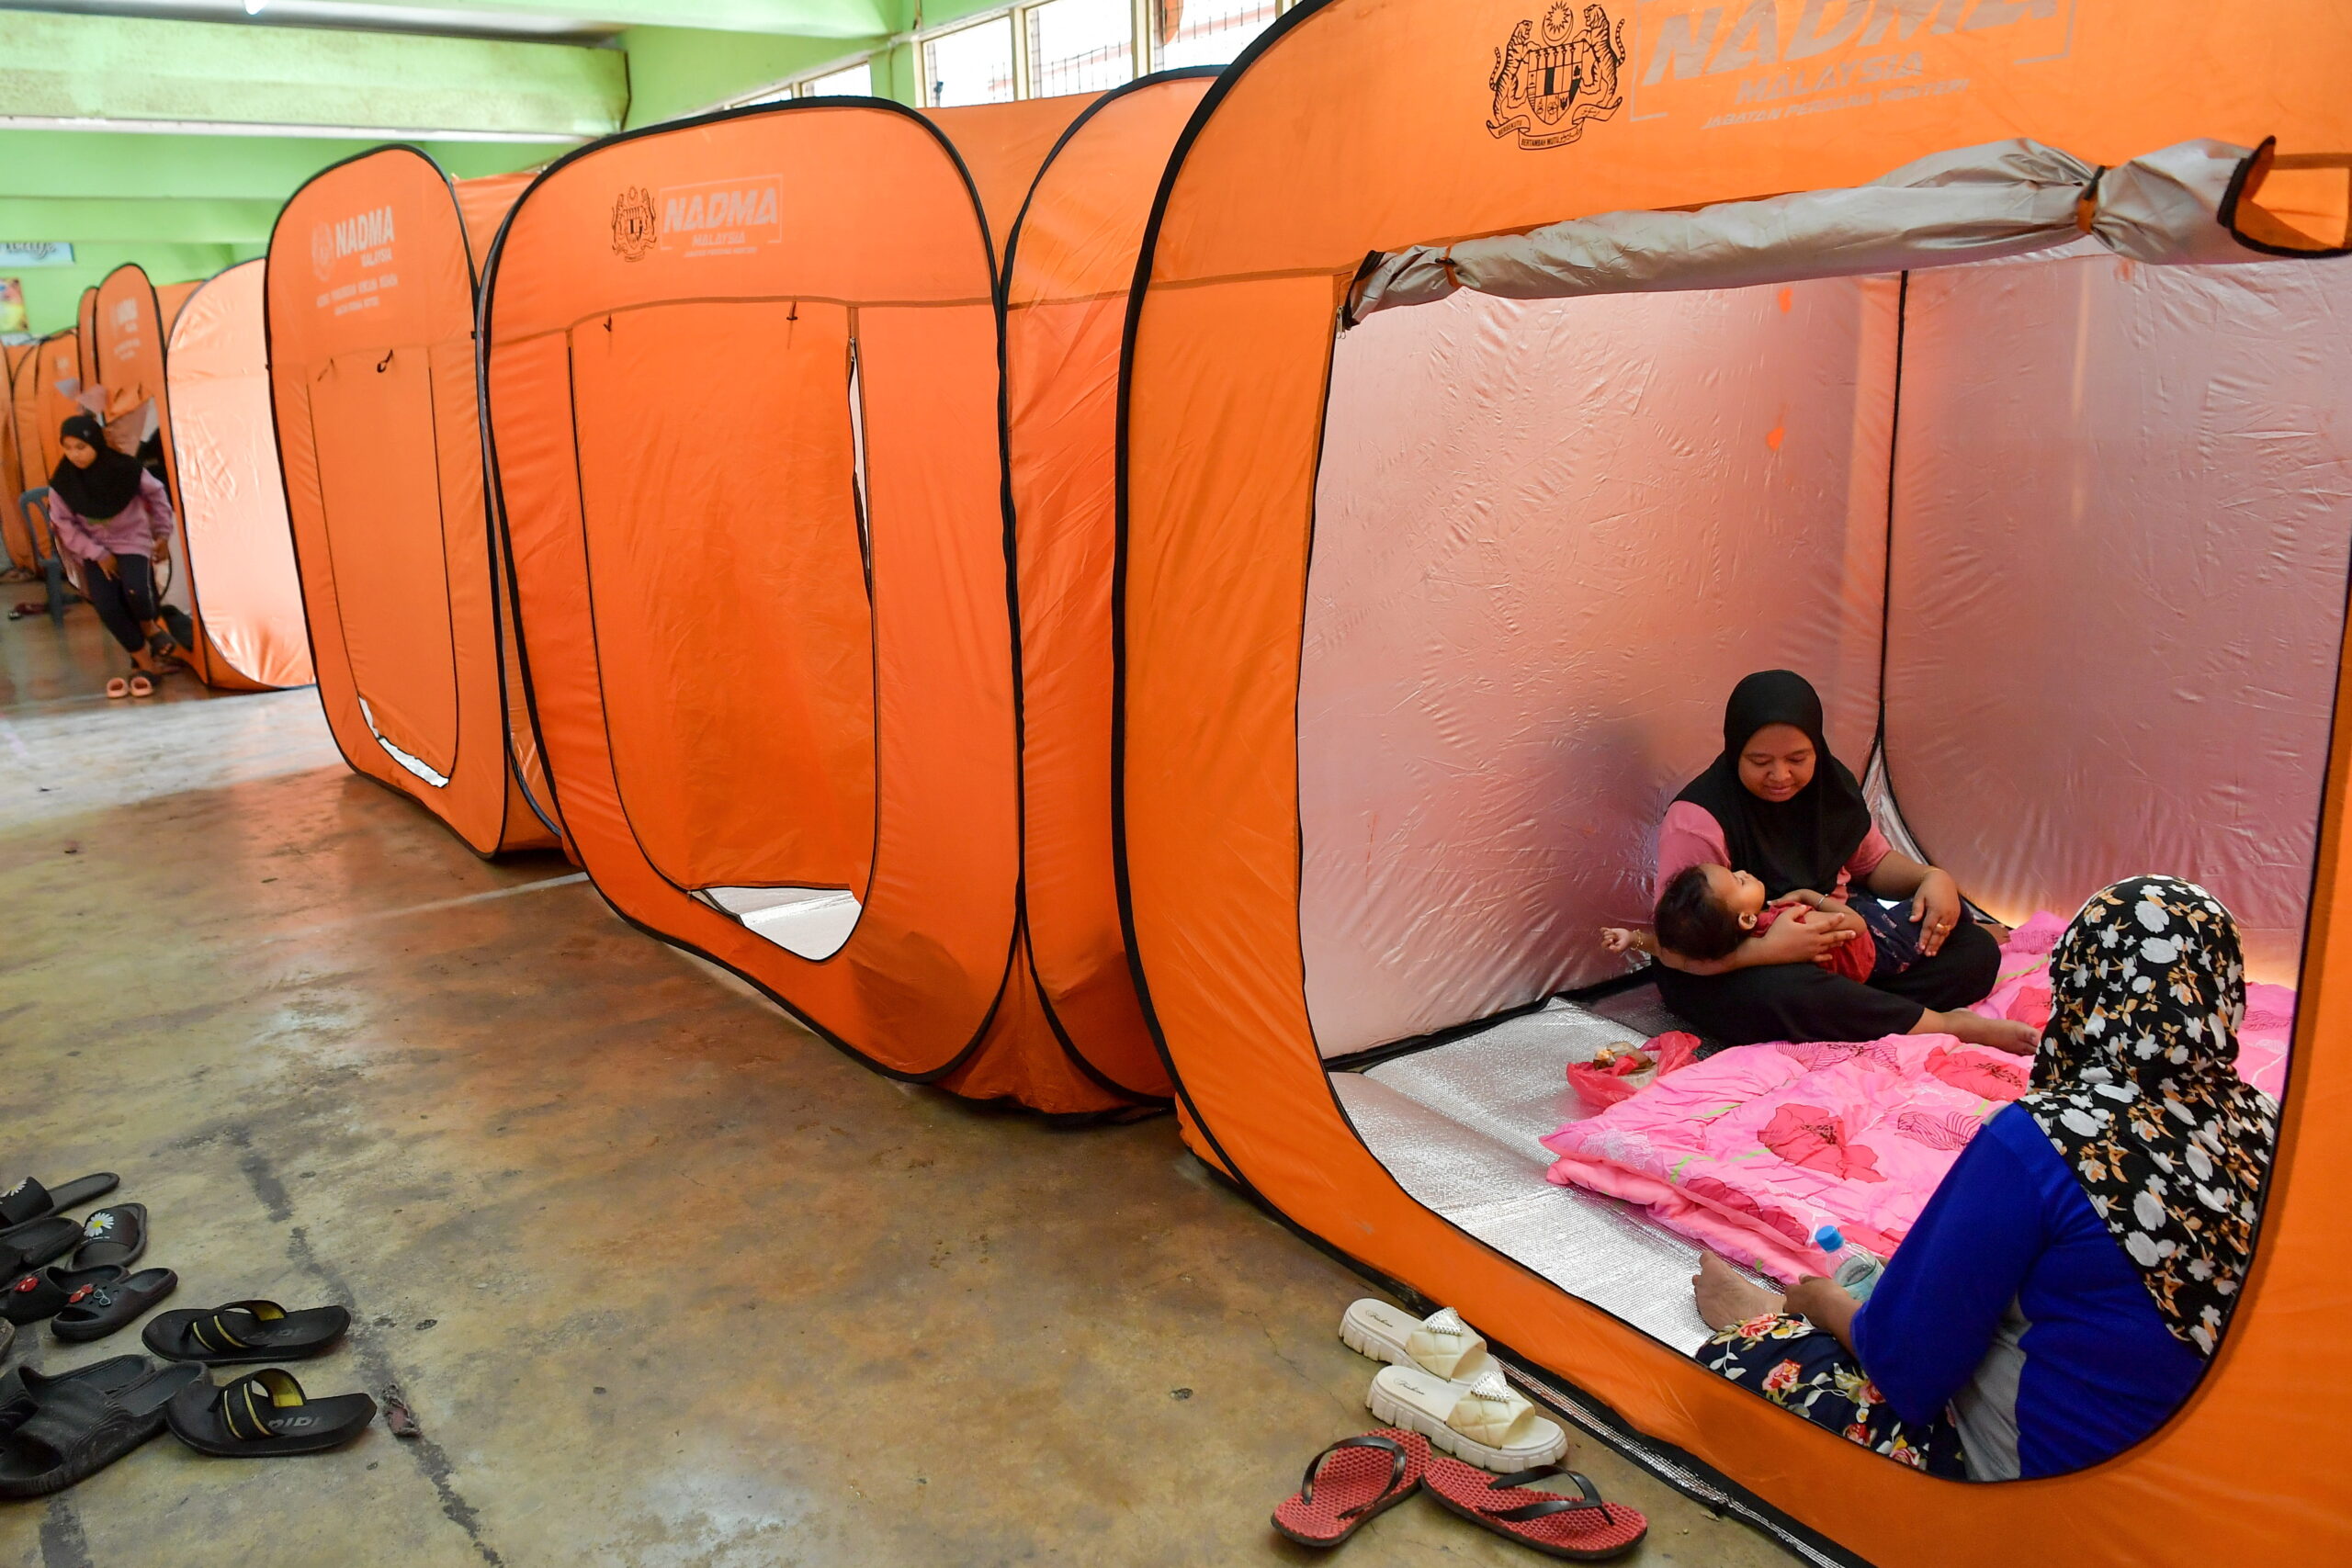 14 new Covid-19 cases in Kelantan, Terengganu relief centres: Dzulkefly